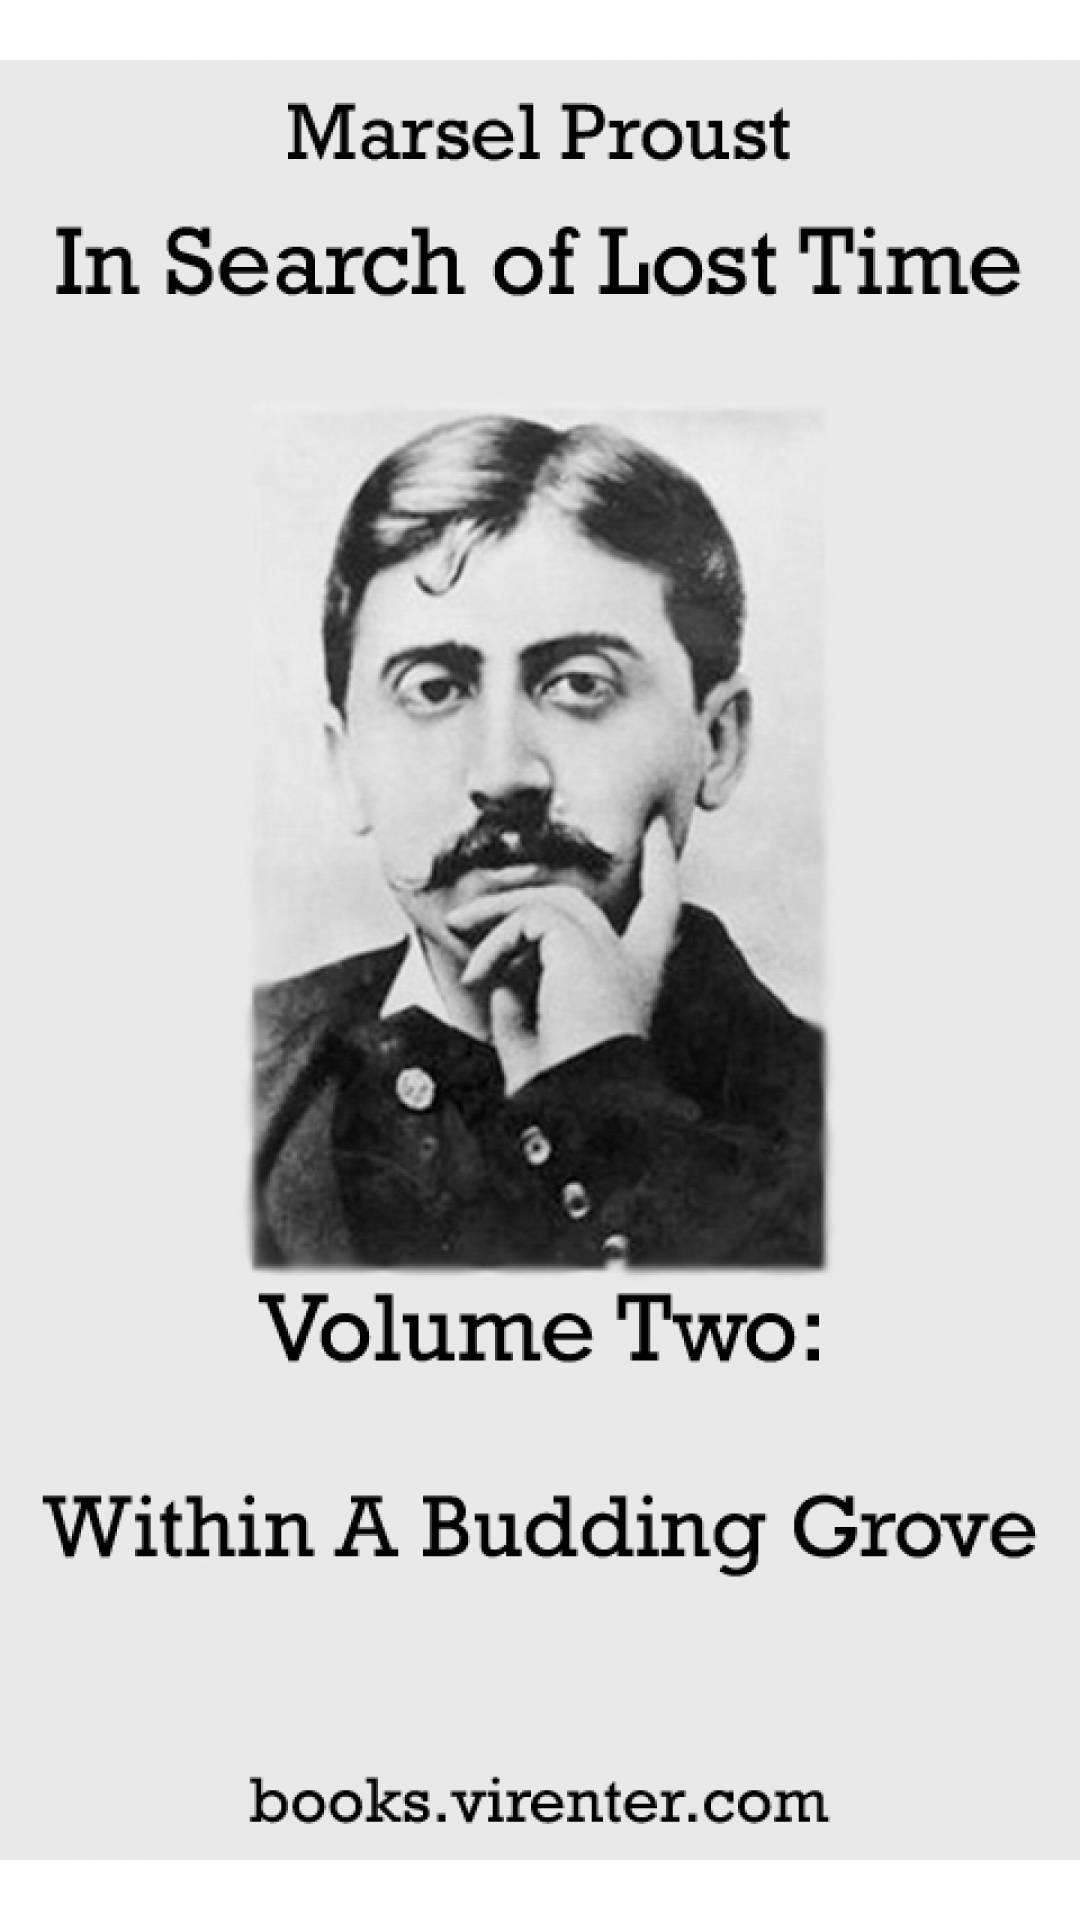 Marcel Proust - Within A Budding Grove